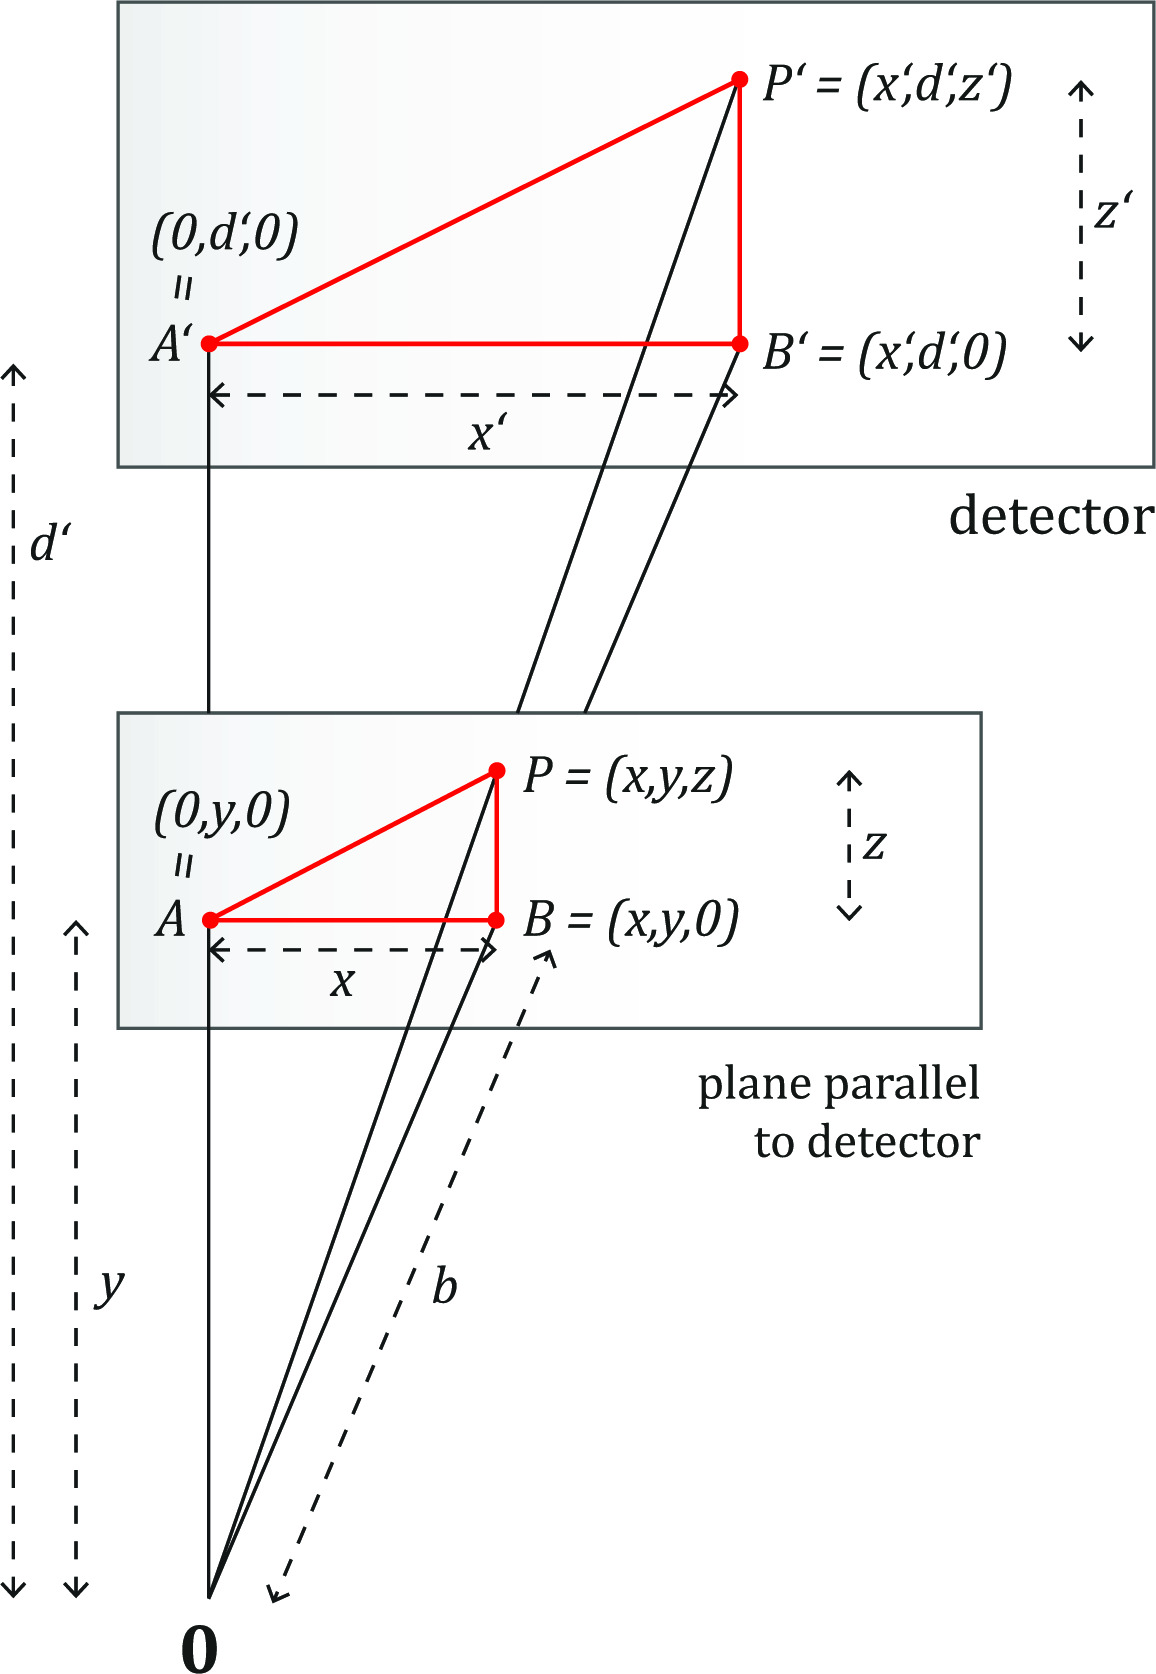 Fig. 2 
            Geometric drawing illustrating the intercept theorem used to derive the relationship between an arbitrary point P = (x, y, z) and its image P' = (x', d', z') located on the detector (first step of model construction). The Cartesian coordinate system has its origin O at the X-ray source and its y-axis coincides with the direction of the central X-ray beam. The source-image distance is denoted by d′.
          